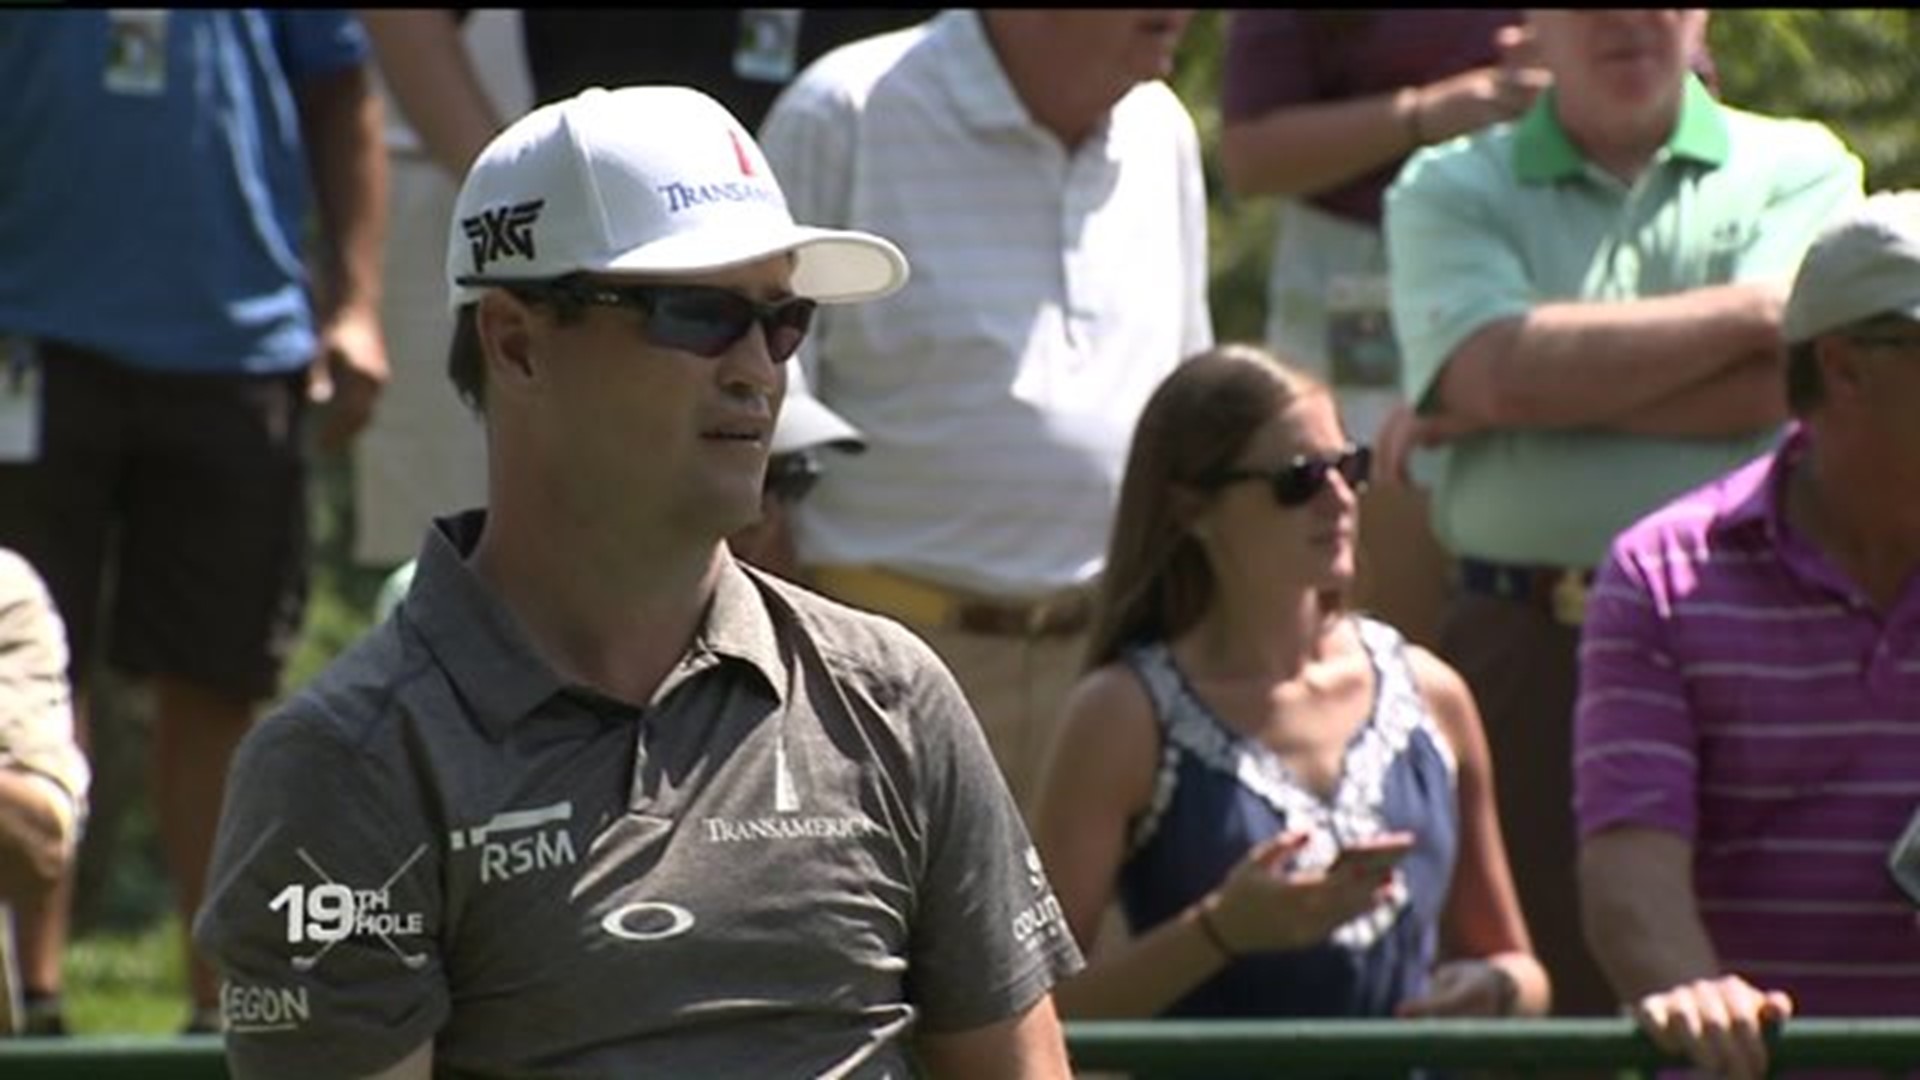 Zach Johnson tees it up in the Pro-Am